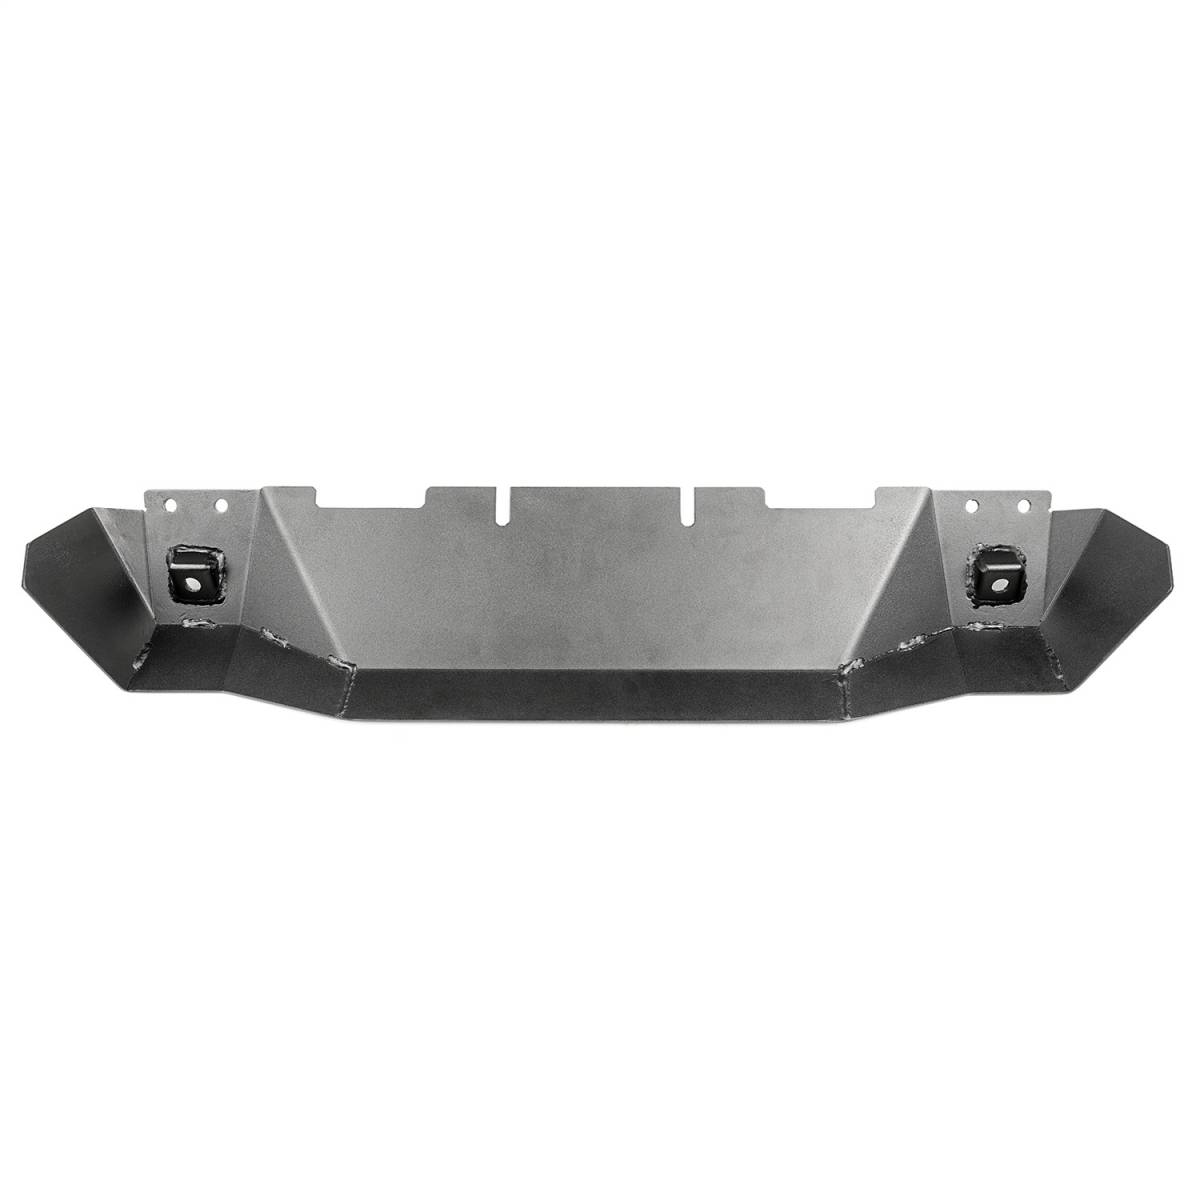 WARN 65443 Body Armor Differential Mount Skid Plate for Dana 30 Applic - 1